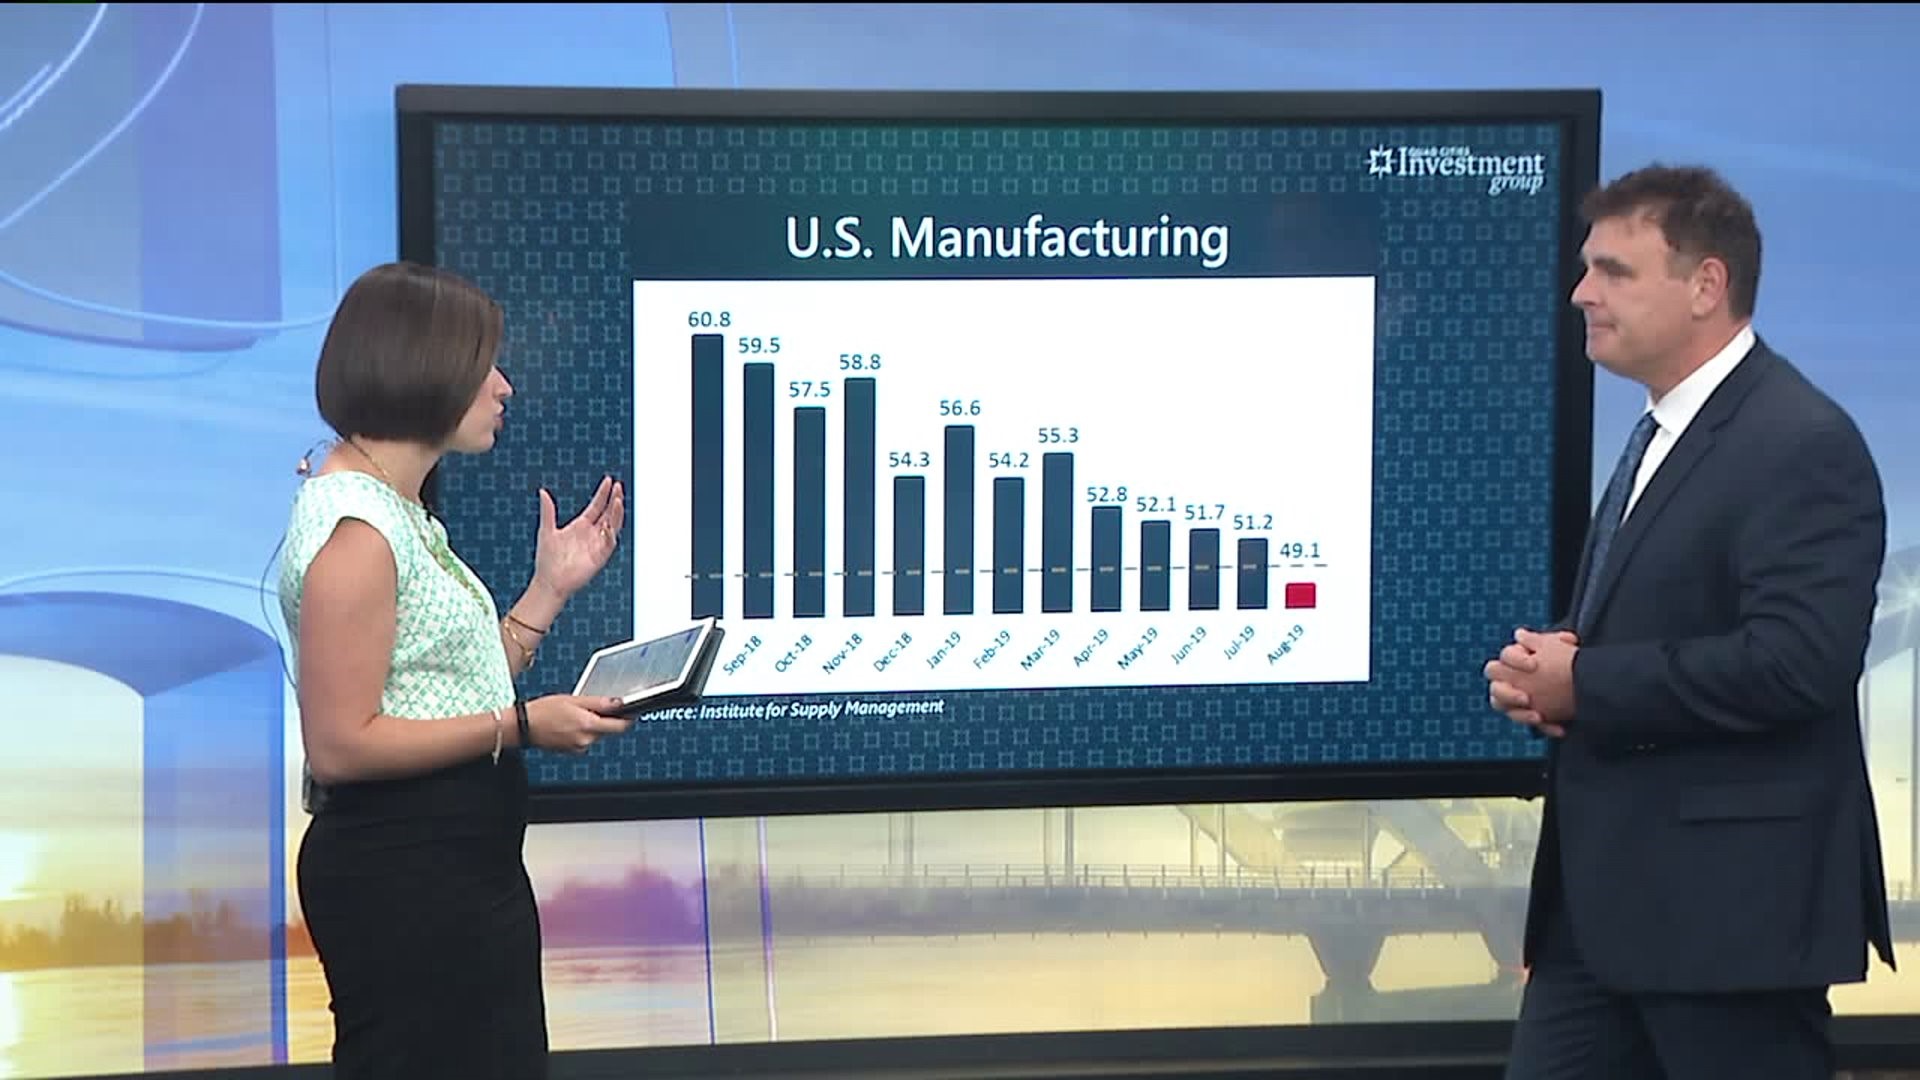 The Big Challenge Facing The U.S. Manufacturing Industry